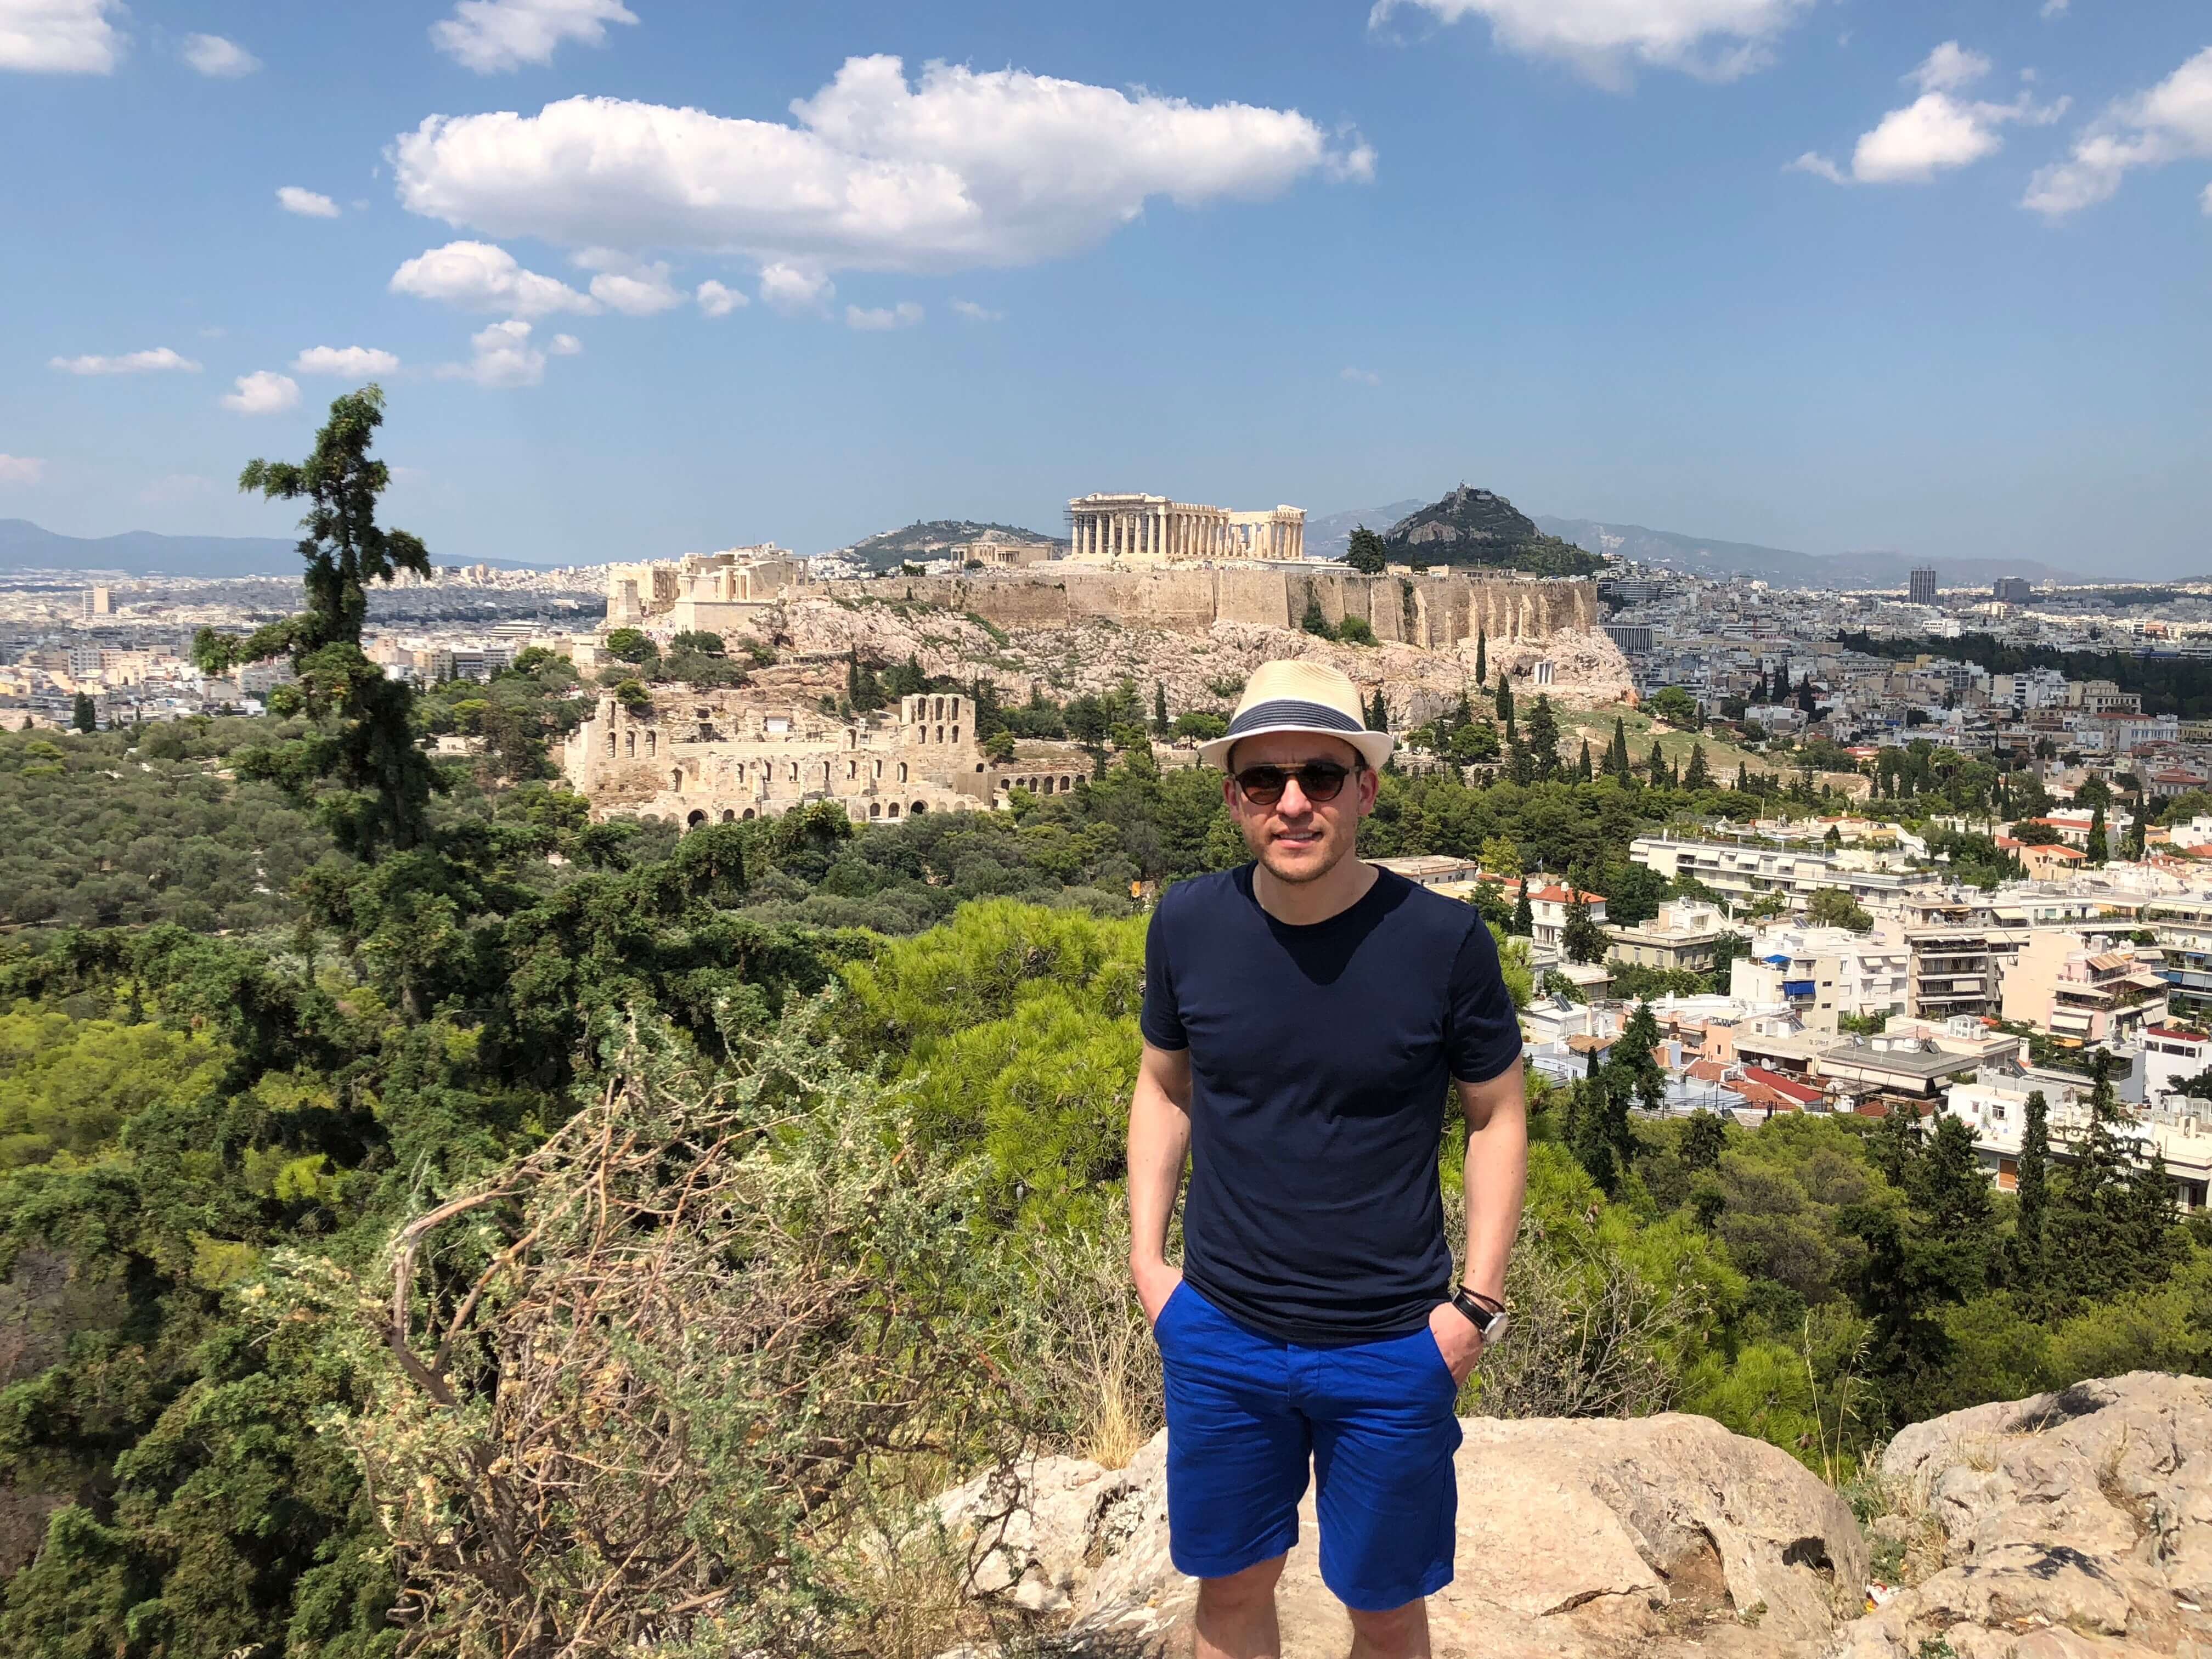 What did I learn from my recent trip to Greece?